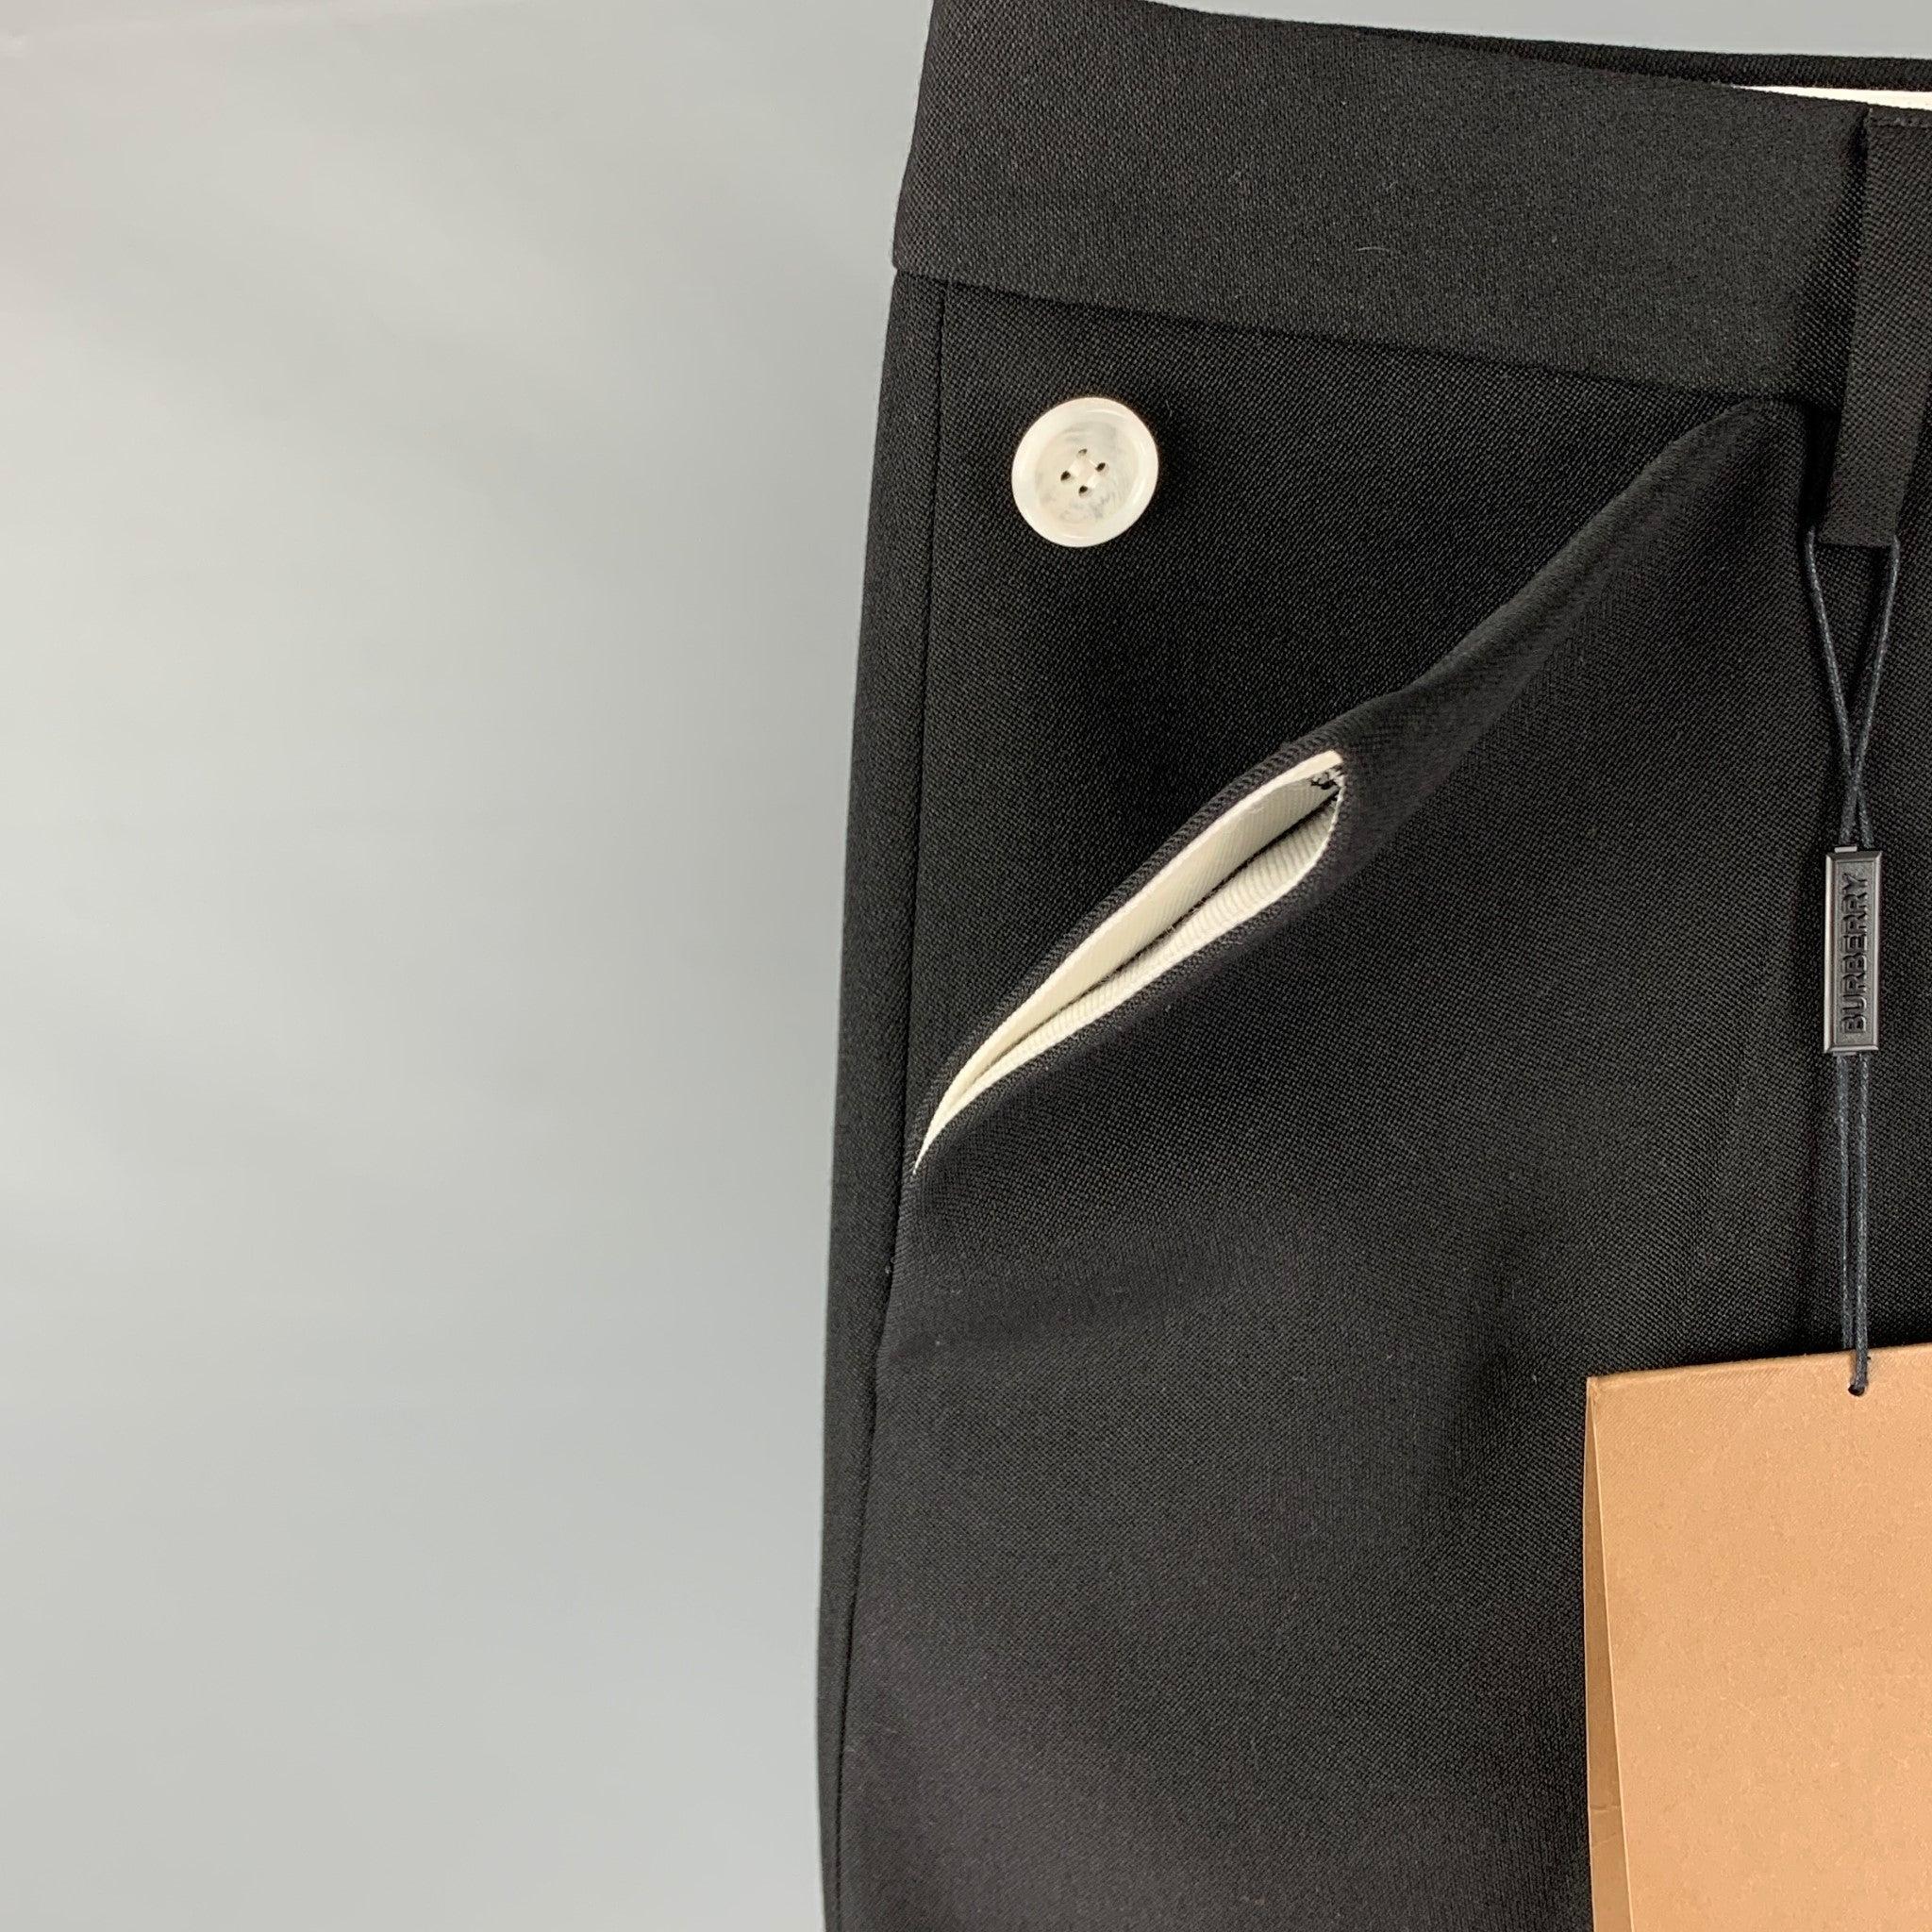 BURBERRY dress pants comes in a black wool featuring a flat front, button pocket details, front tab, and a zip fly closure. Made in Italy.
New With Tags.
 

Marked:   46 

Measurements: 
  Waist: 32 inches  Rise: 10.5 inches  Inseam:
33 inches 
  
 